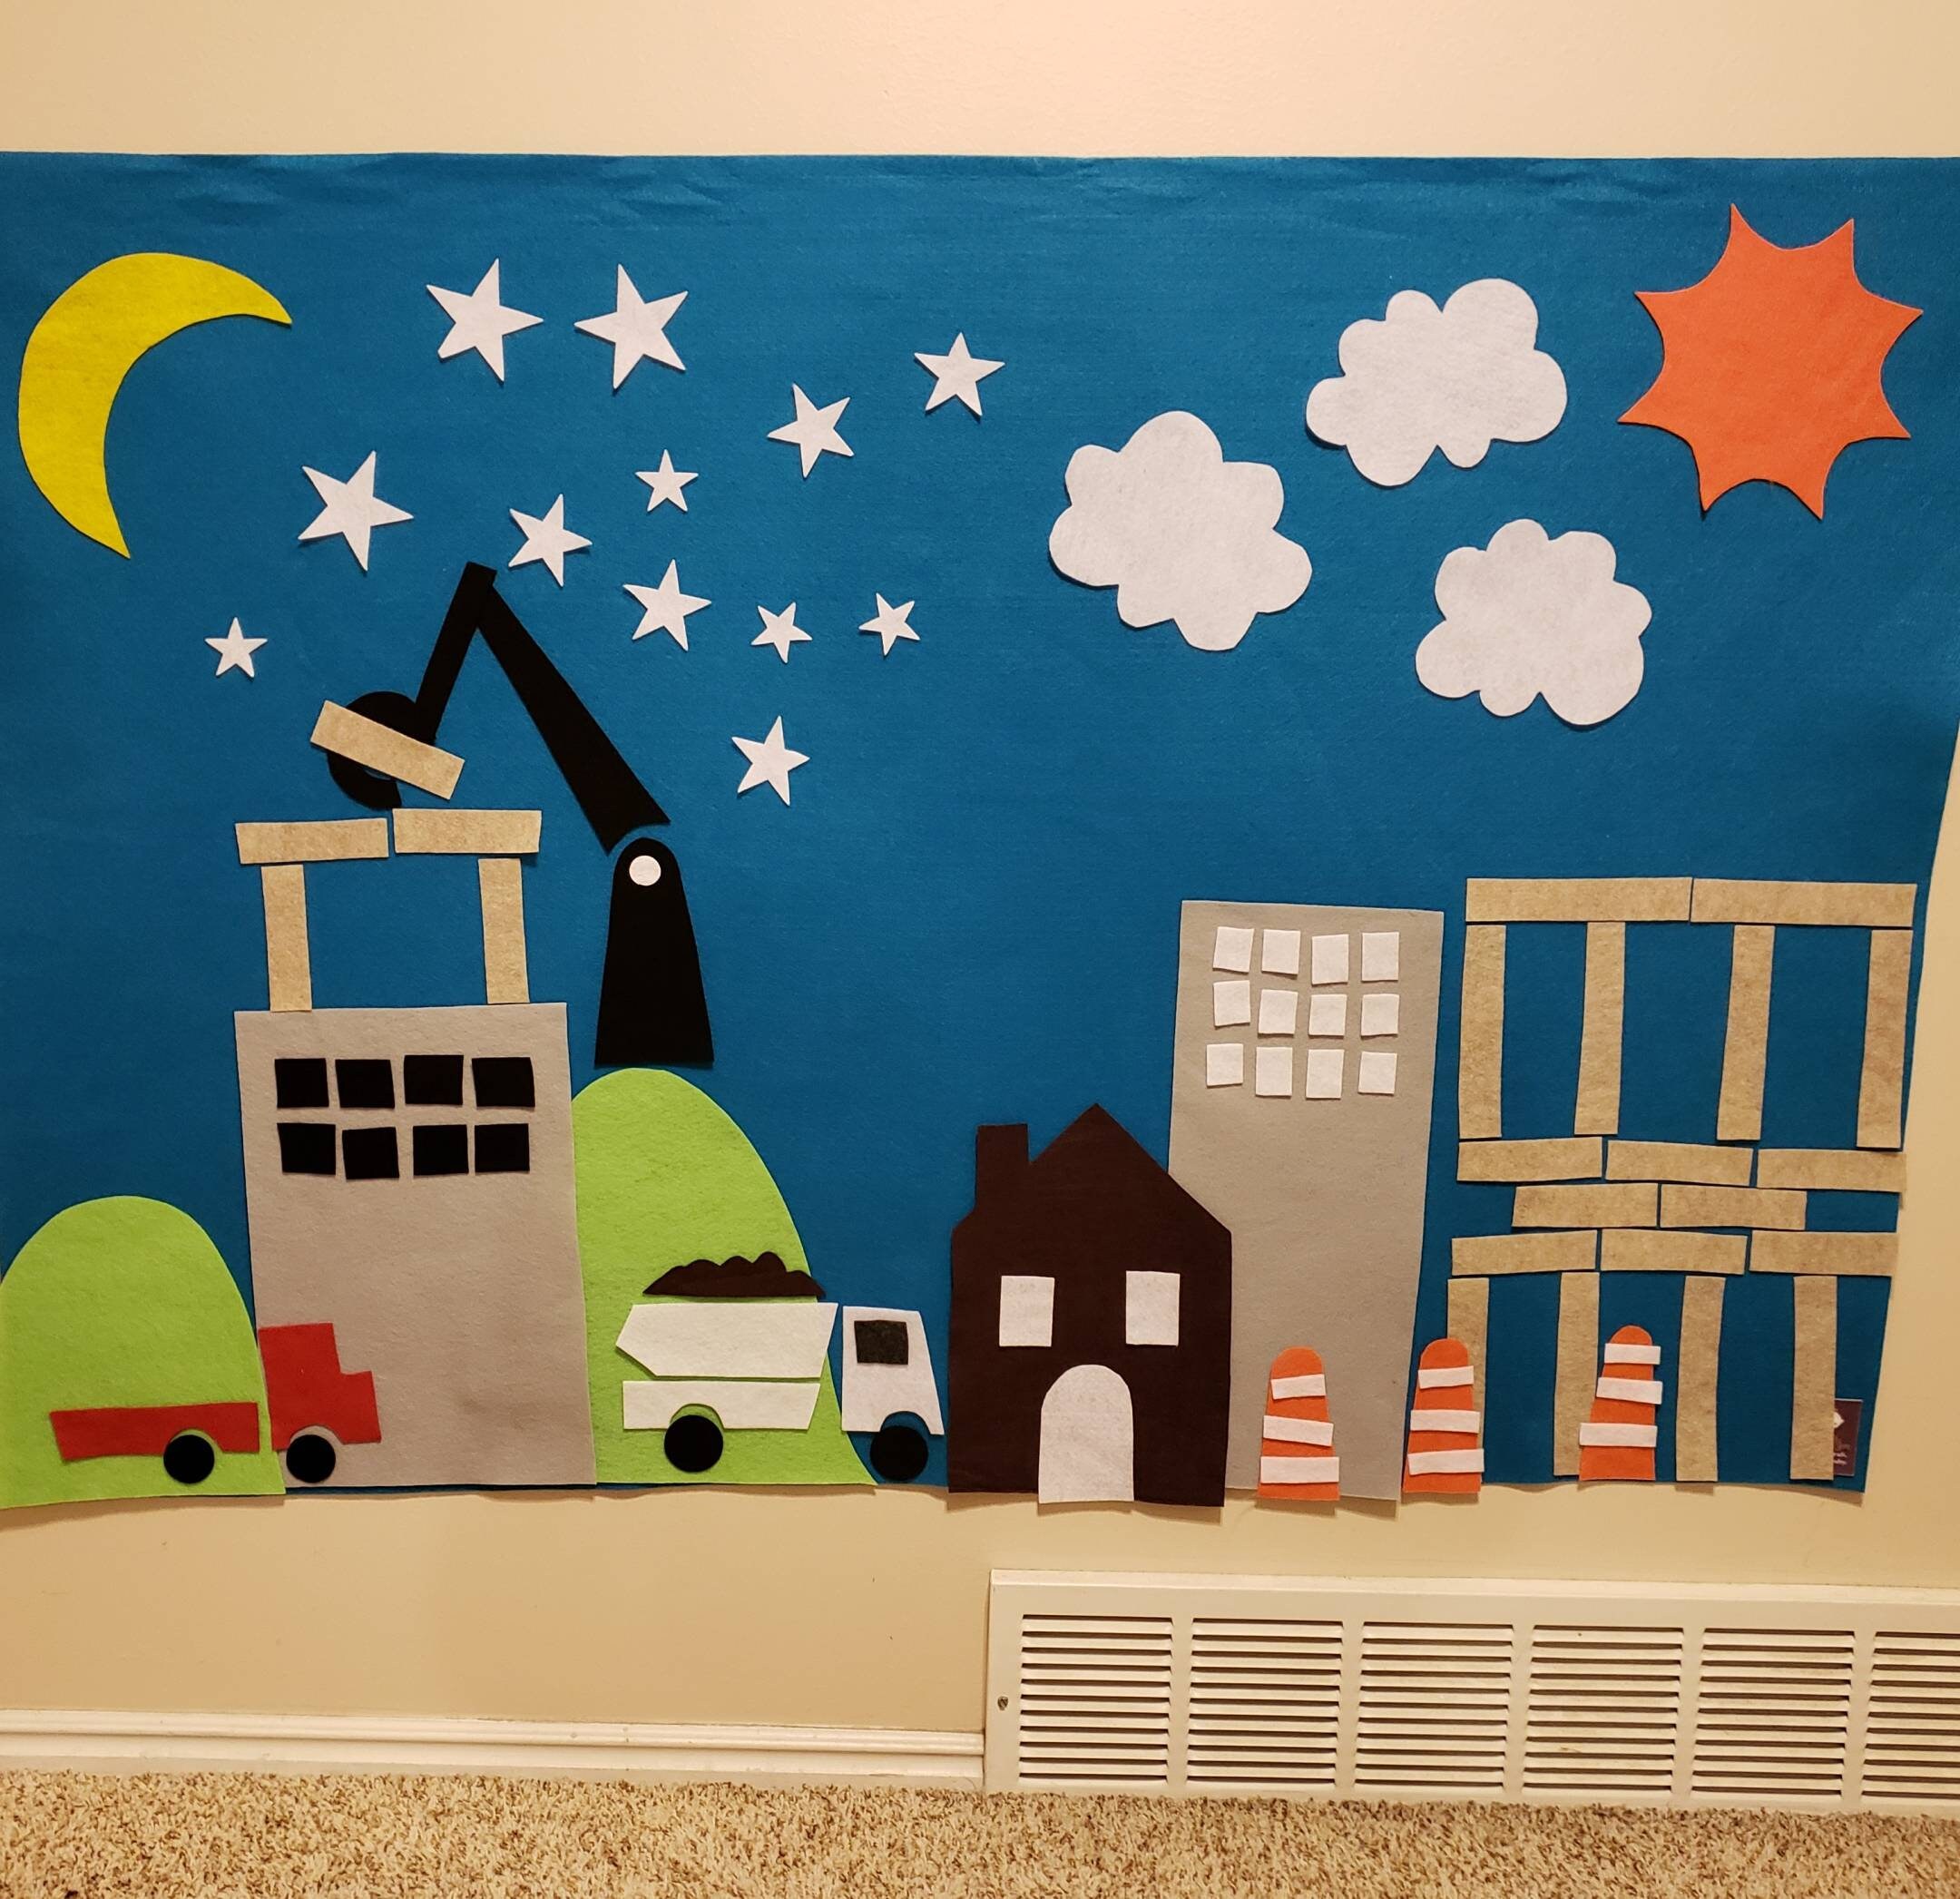 Construction Felt Wall // Montessori Learning // Kids ages 3, 4, 5